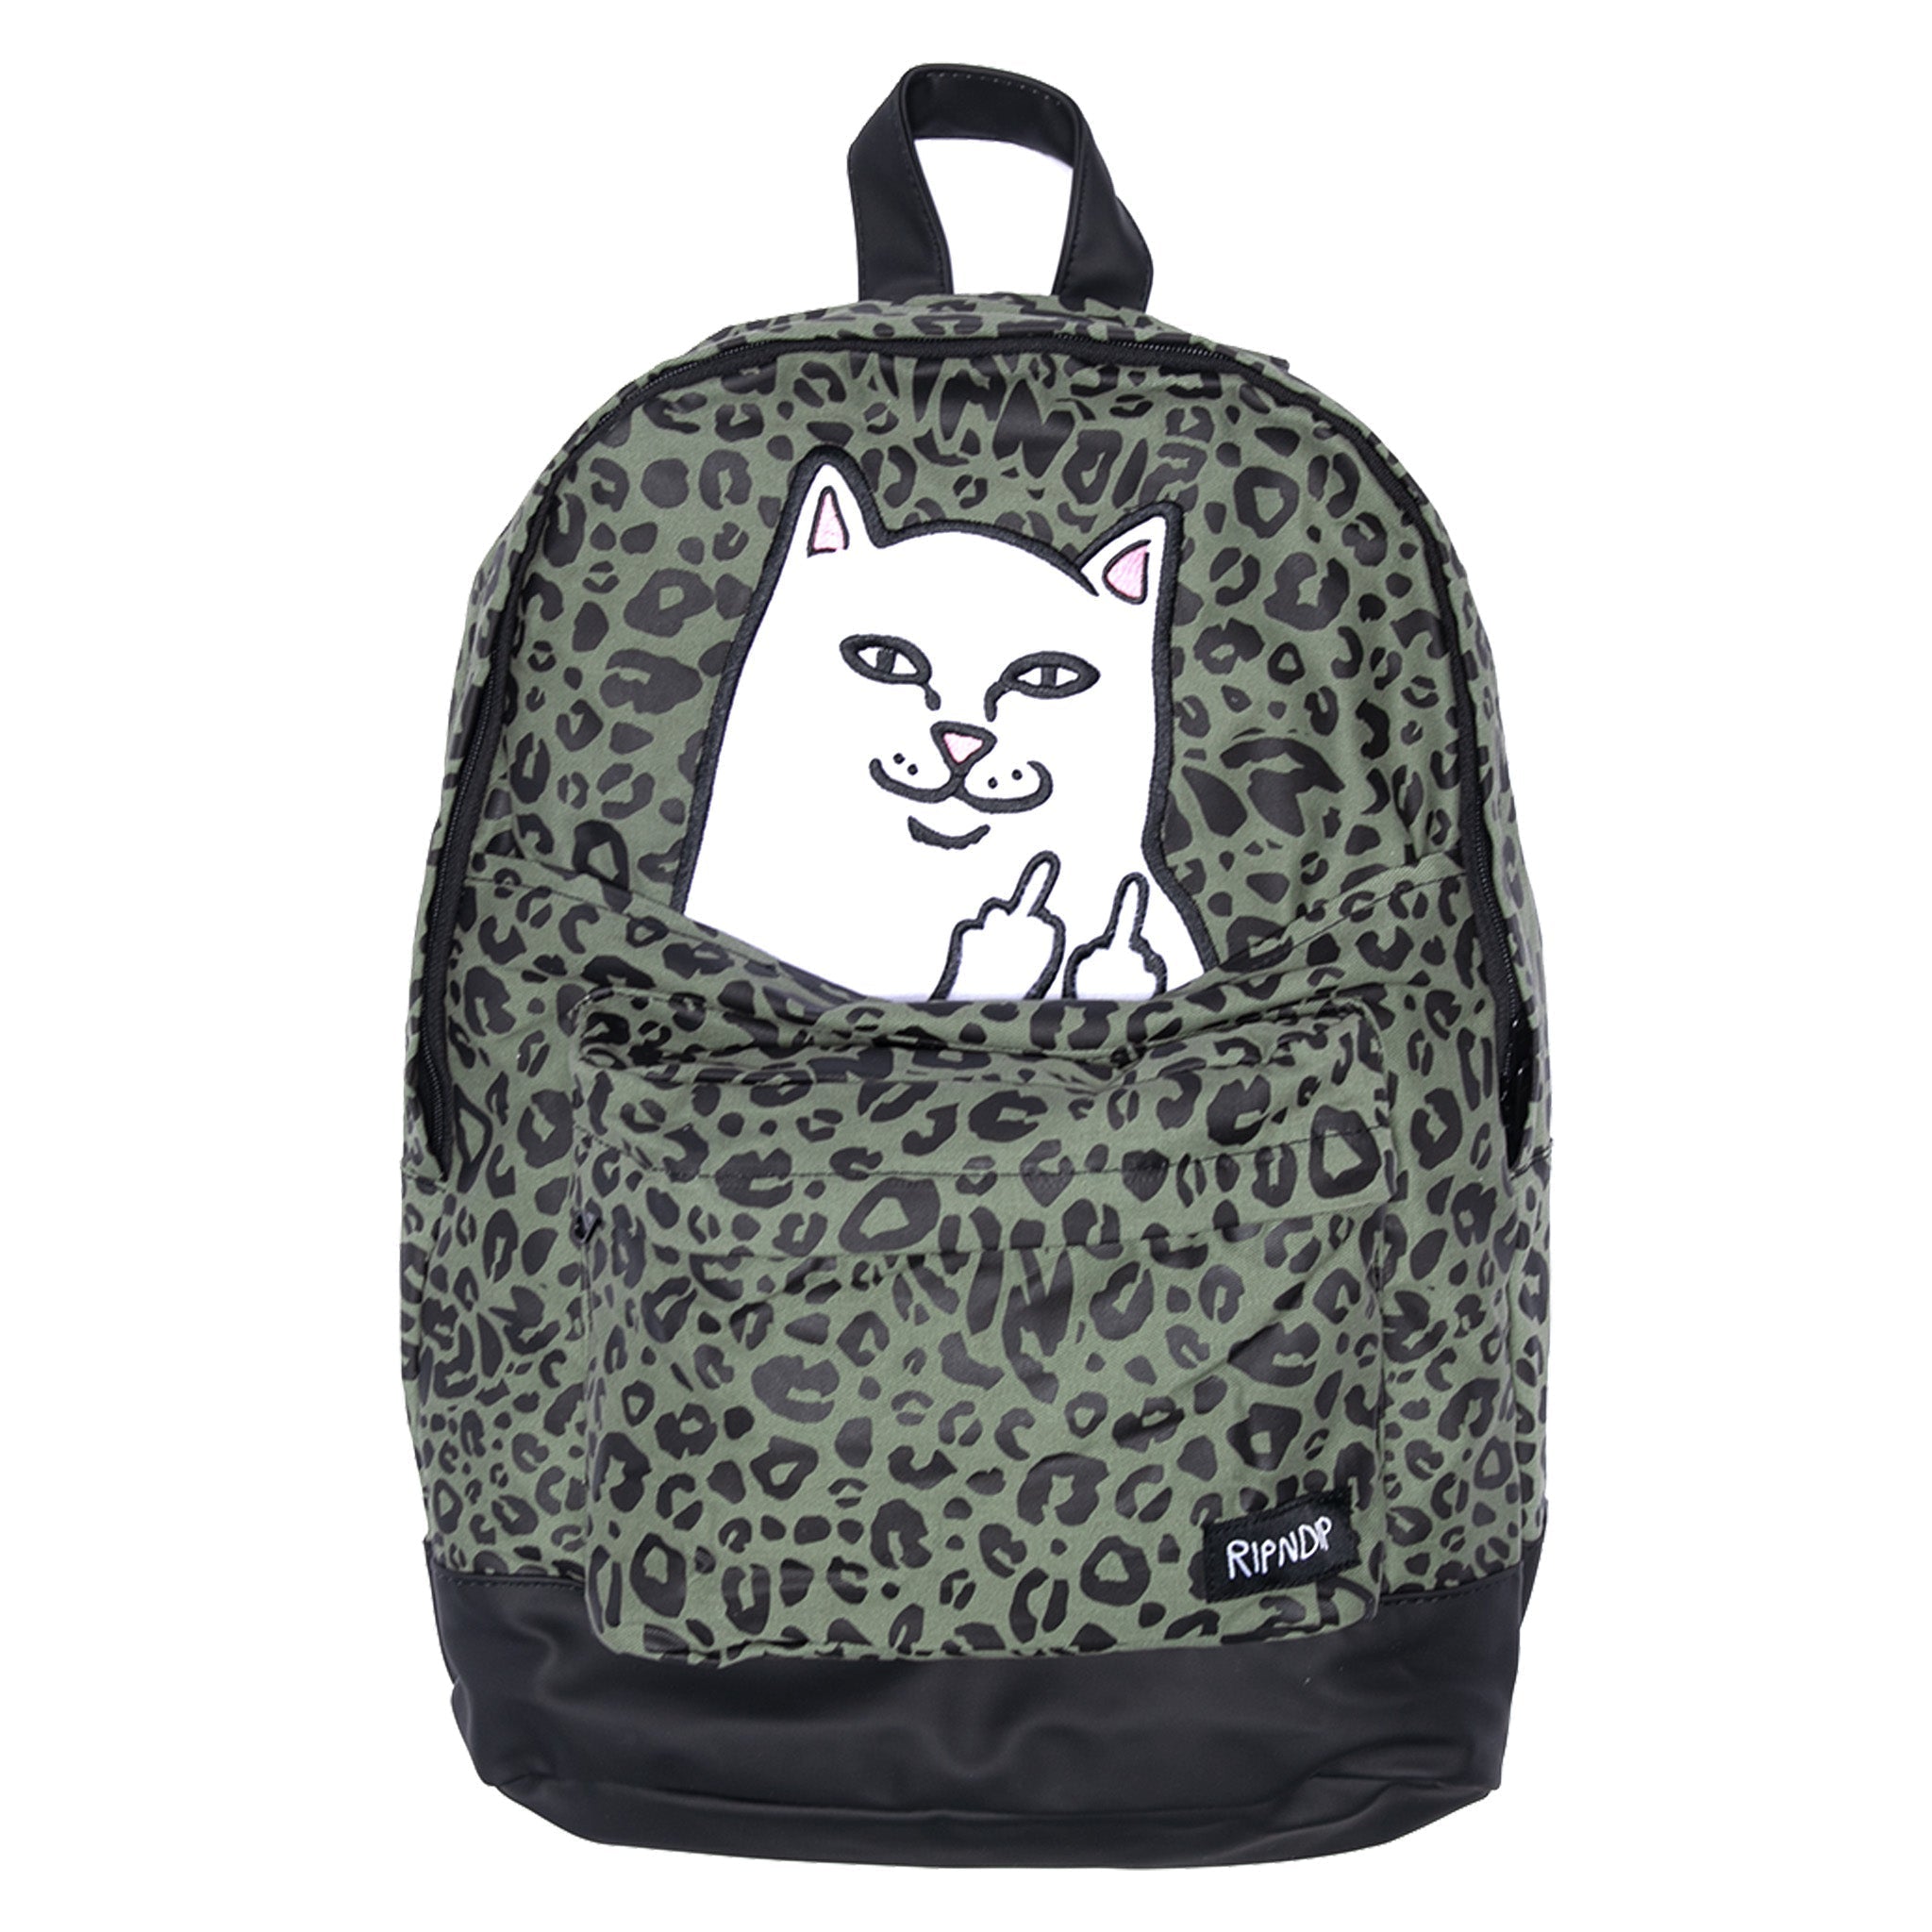 Spotted Backpack